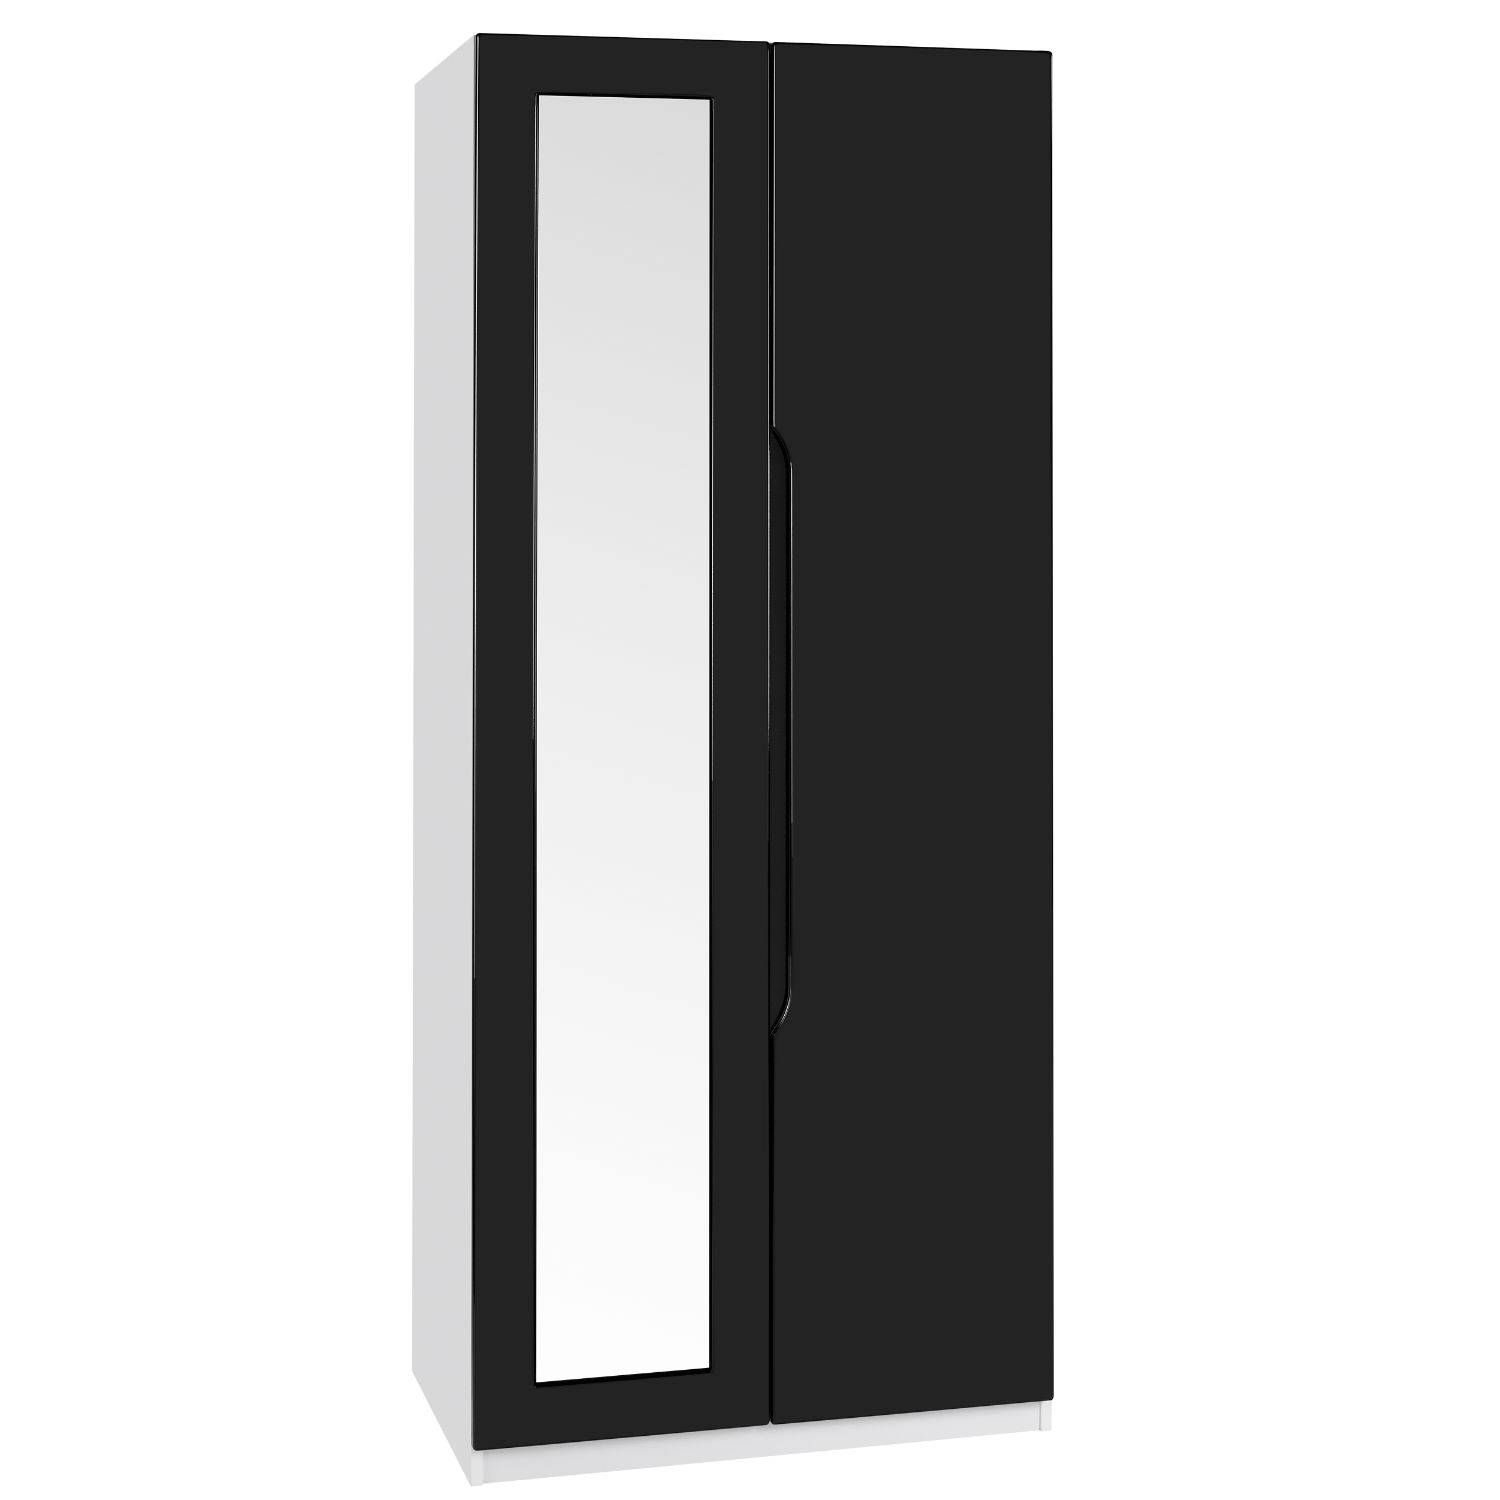 Store – Black Gloss Furniture Intended For Black Gloss Mirror Wardrobes (View 9 of 15)